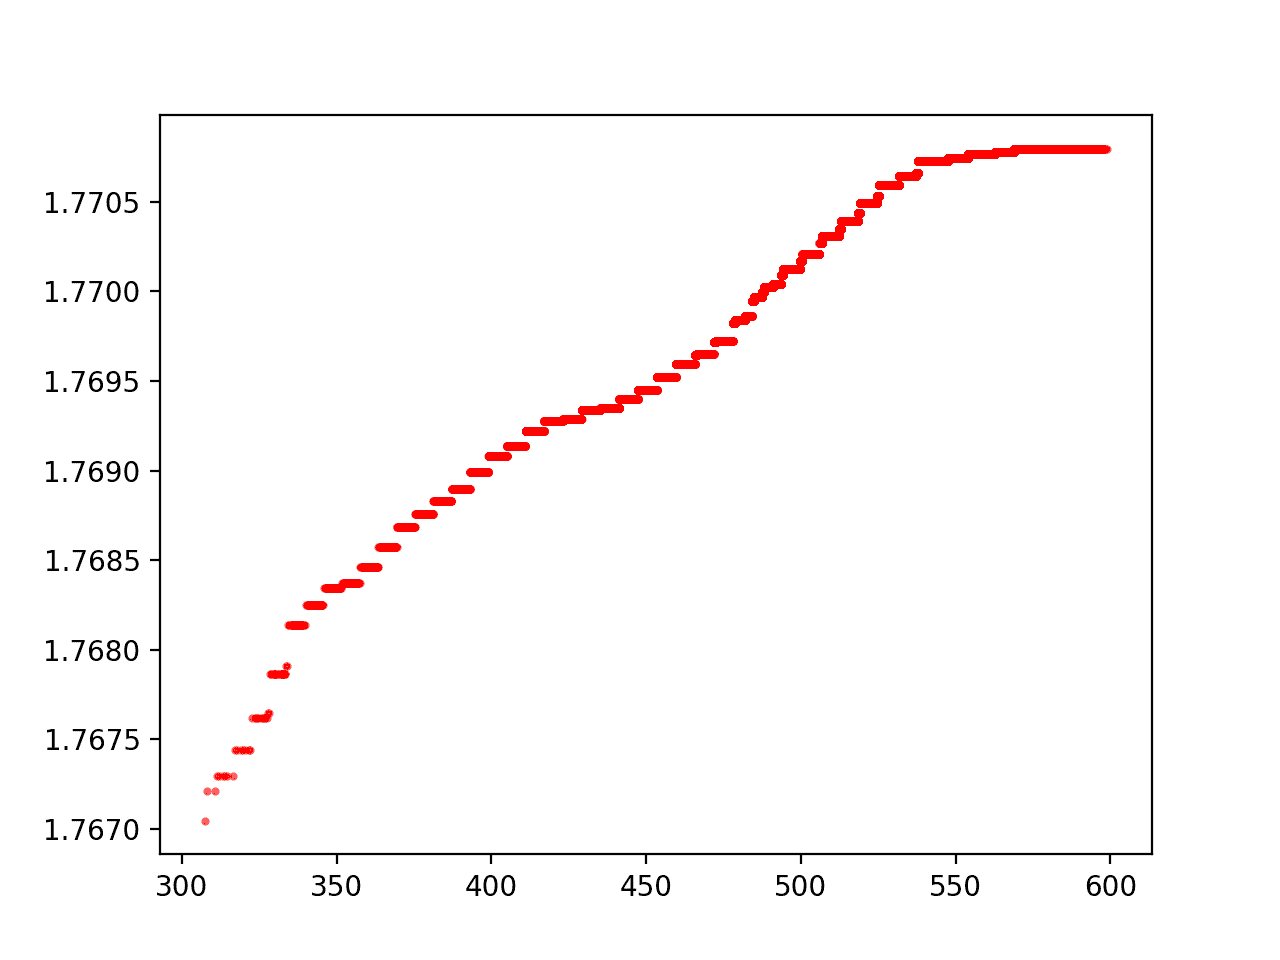 The cumulative maximum witness value for the small database.